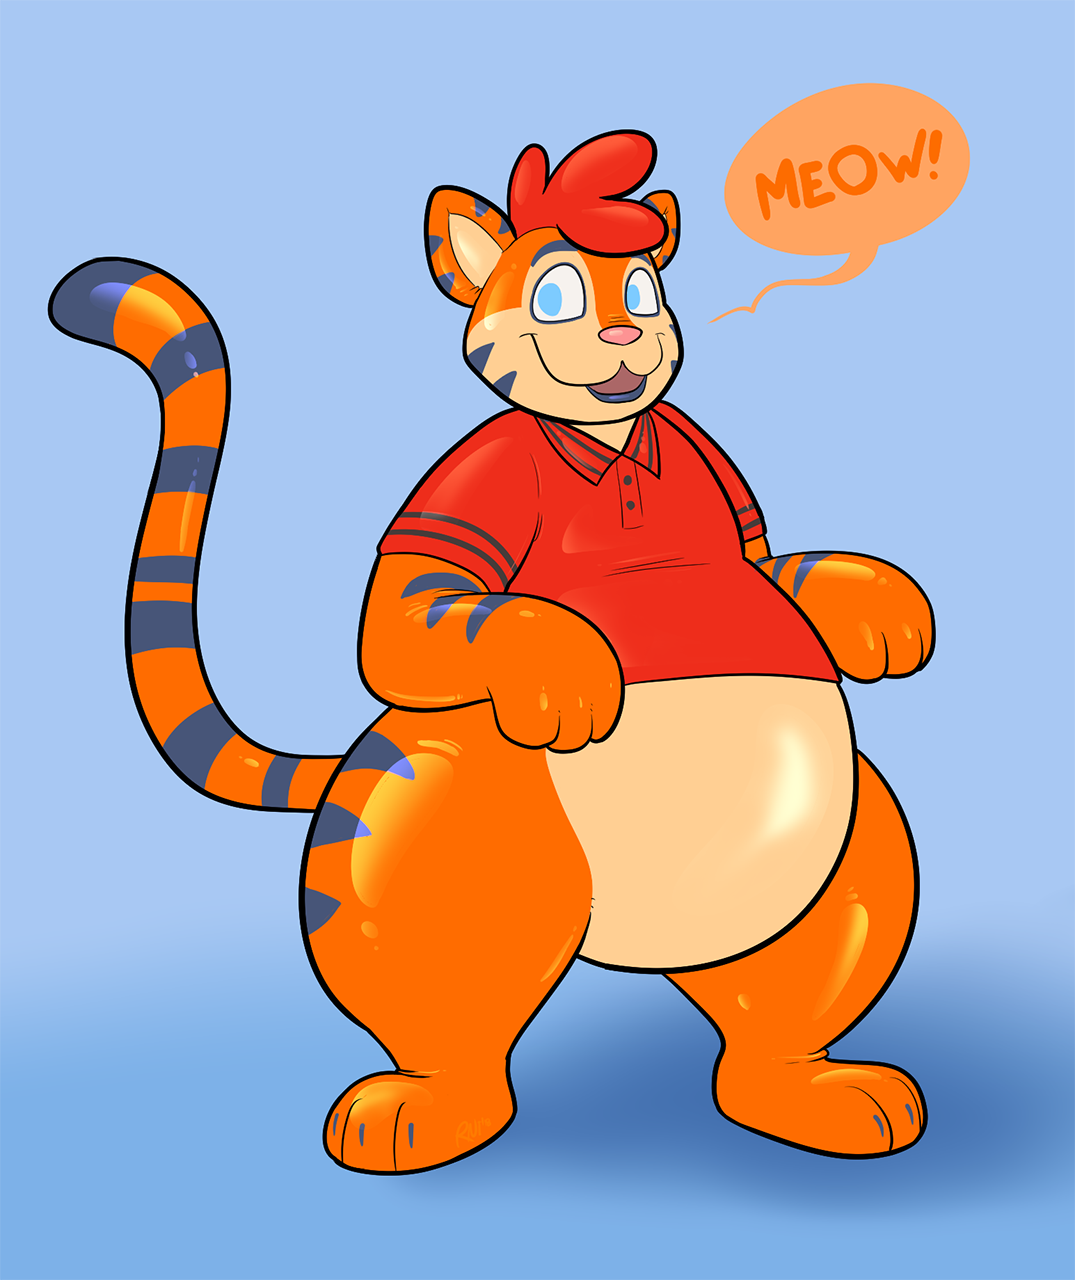 Rubber Tiger Tom Reference by Rednoodle by Redflare500 -- Fur